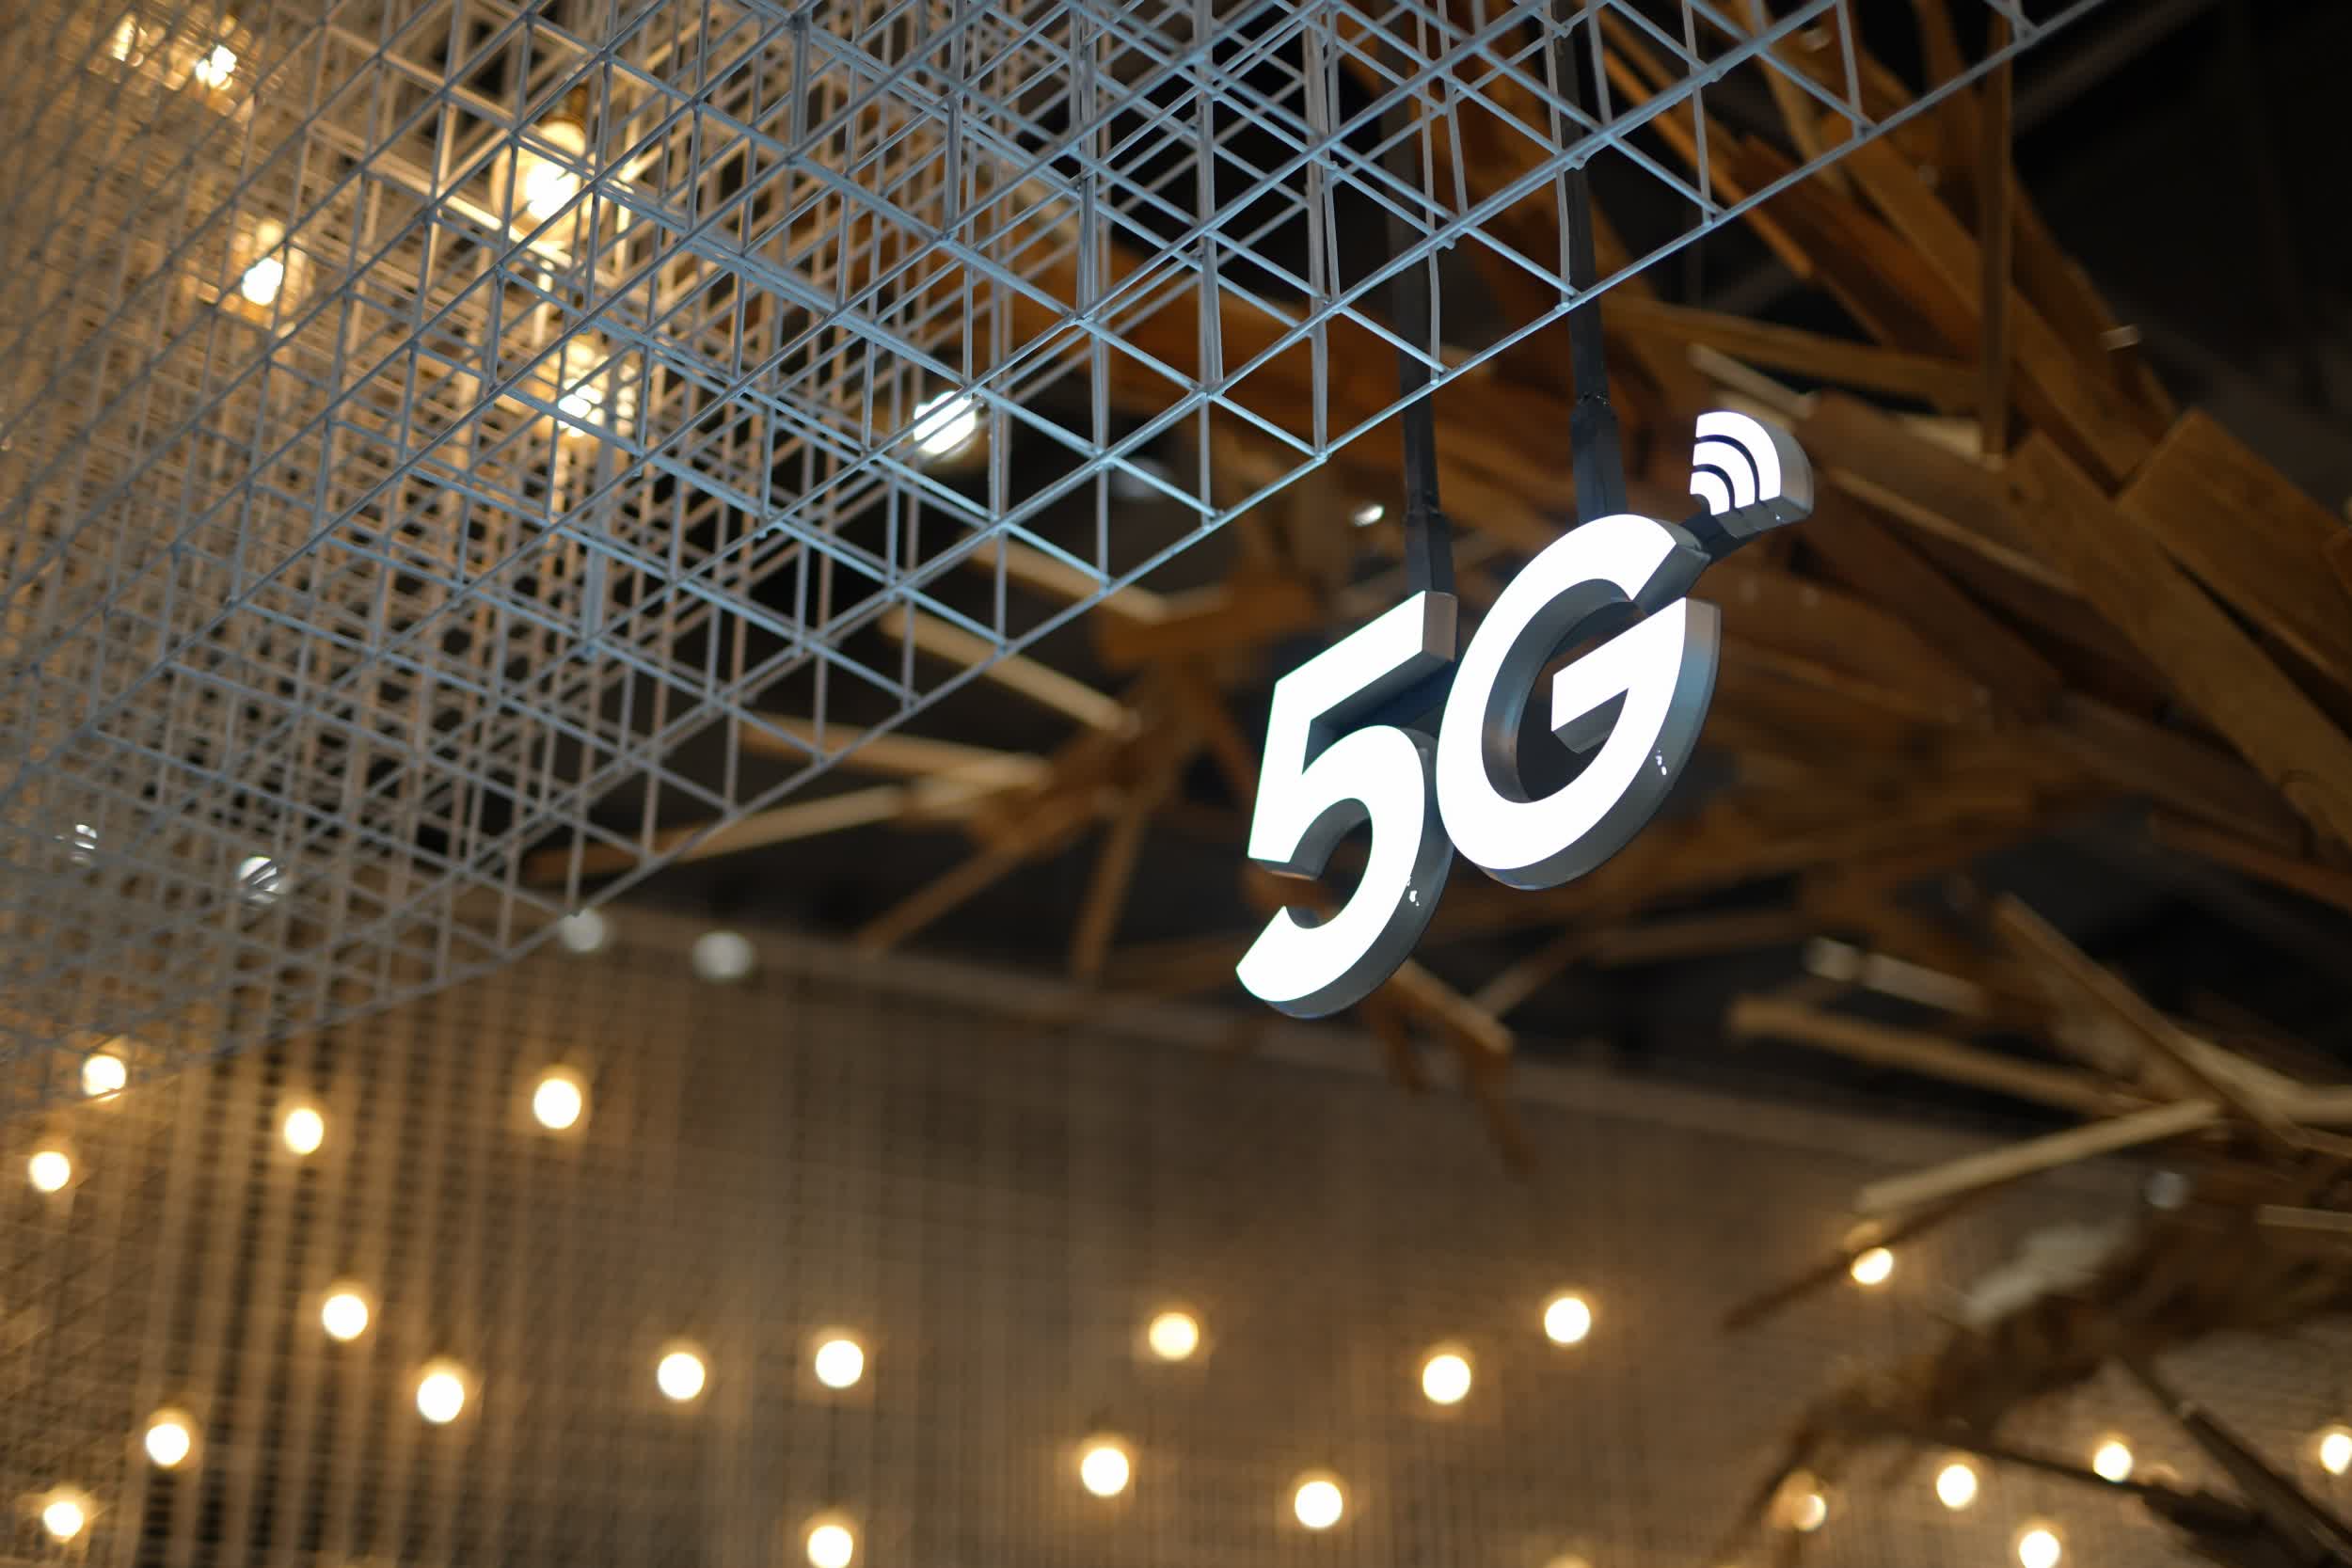 Some 5G users think the technology has been overhyped, fail to notice speed improvements